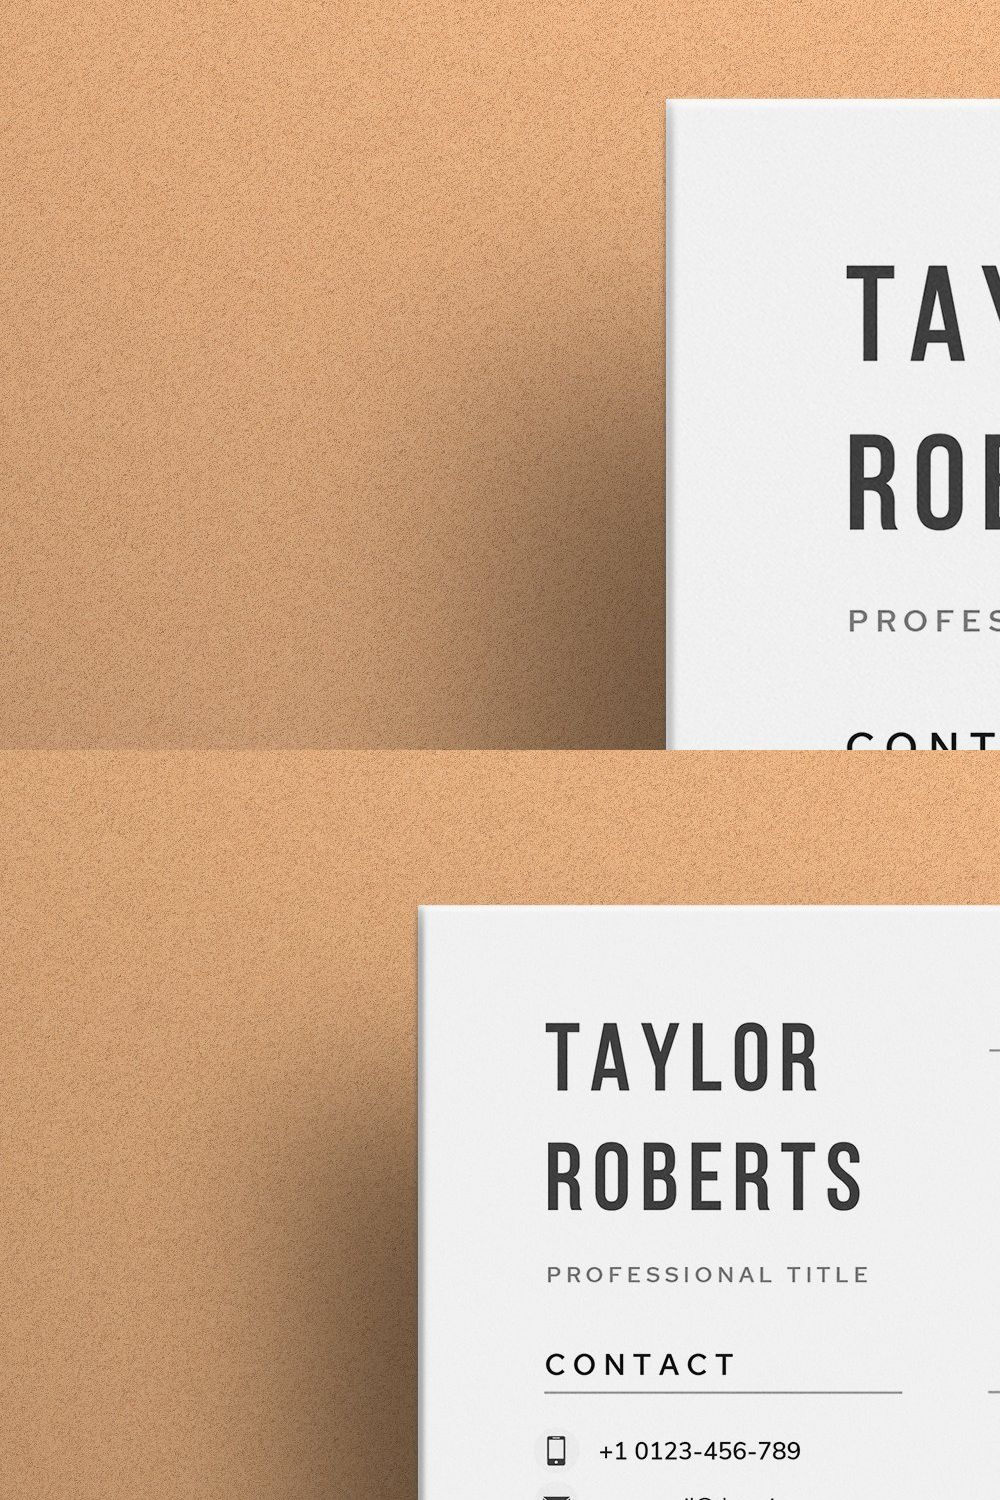 Resume/CV - The Taylor pinterest preview image.